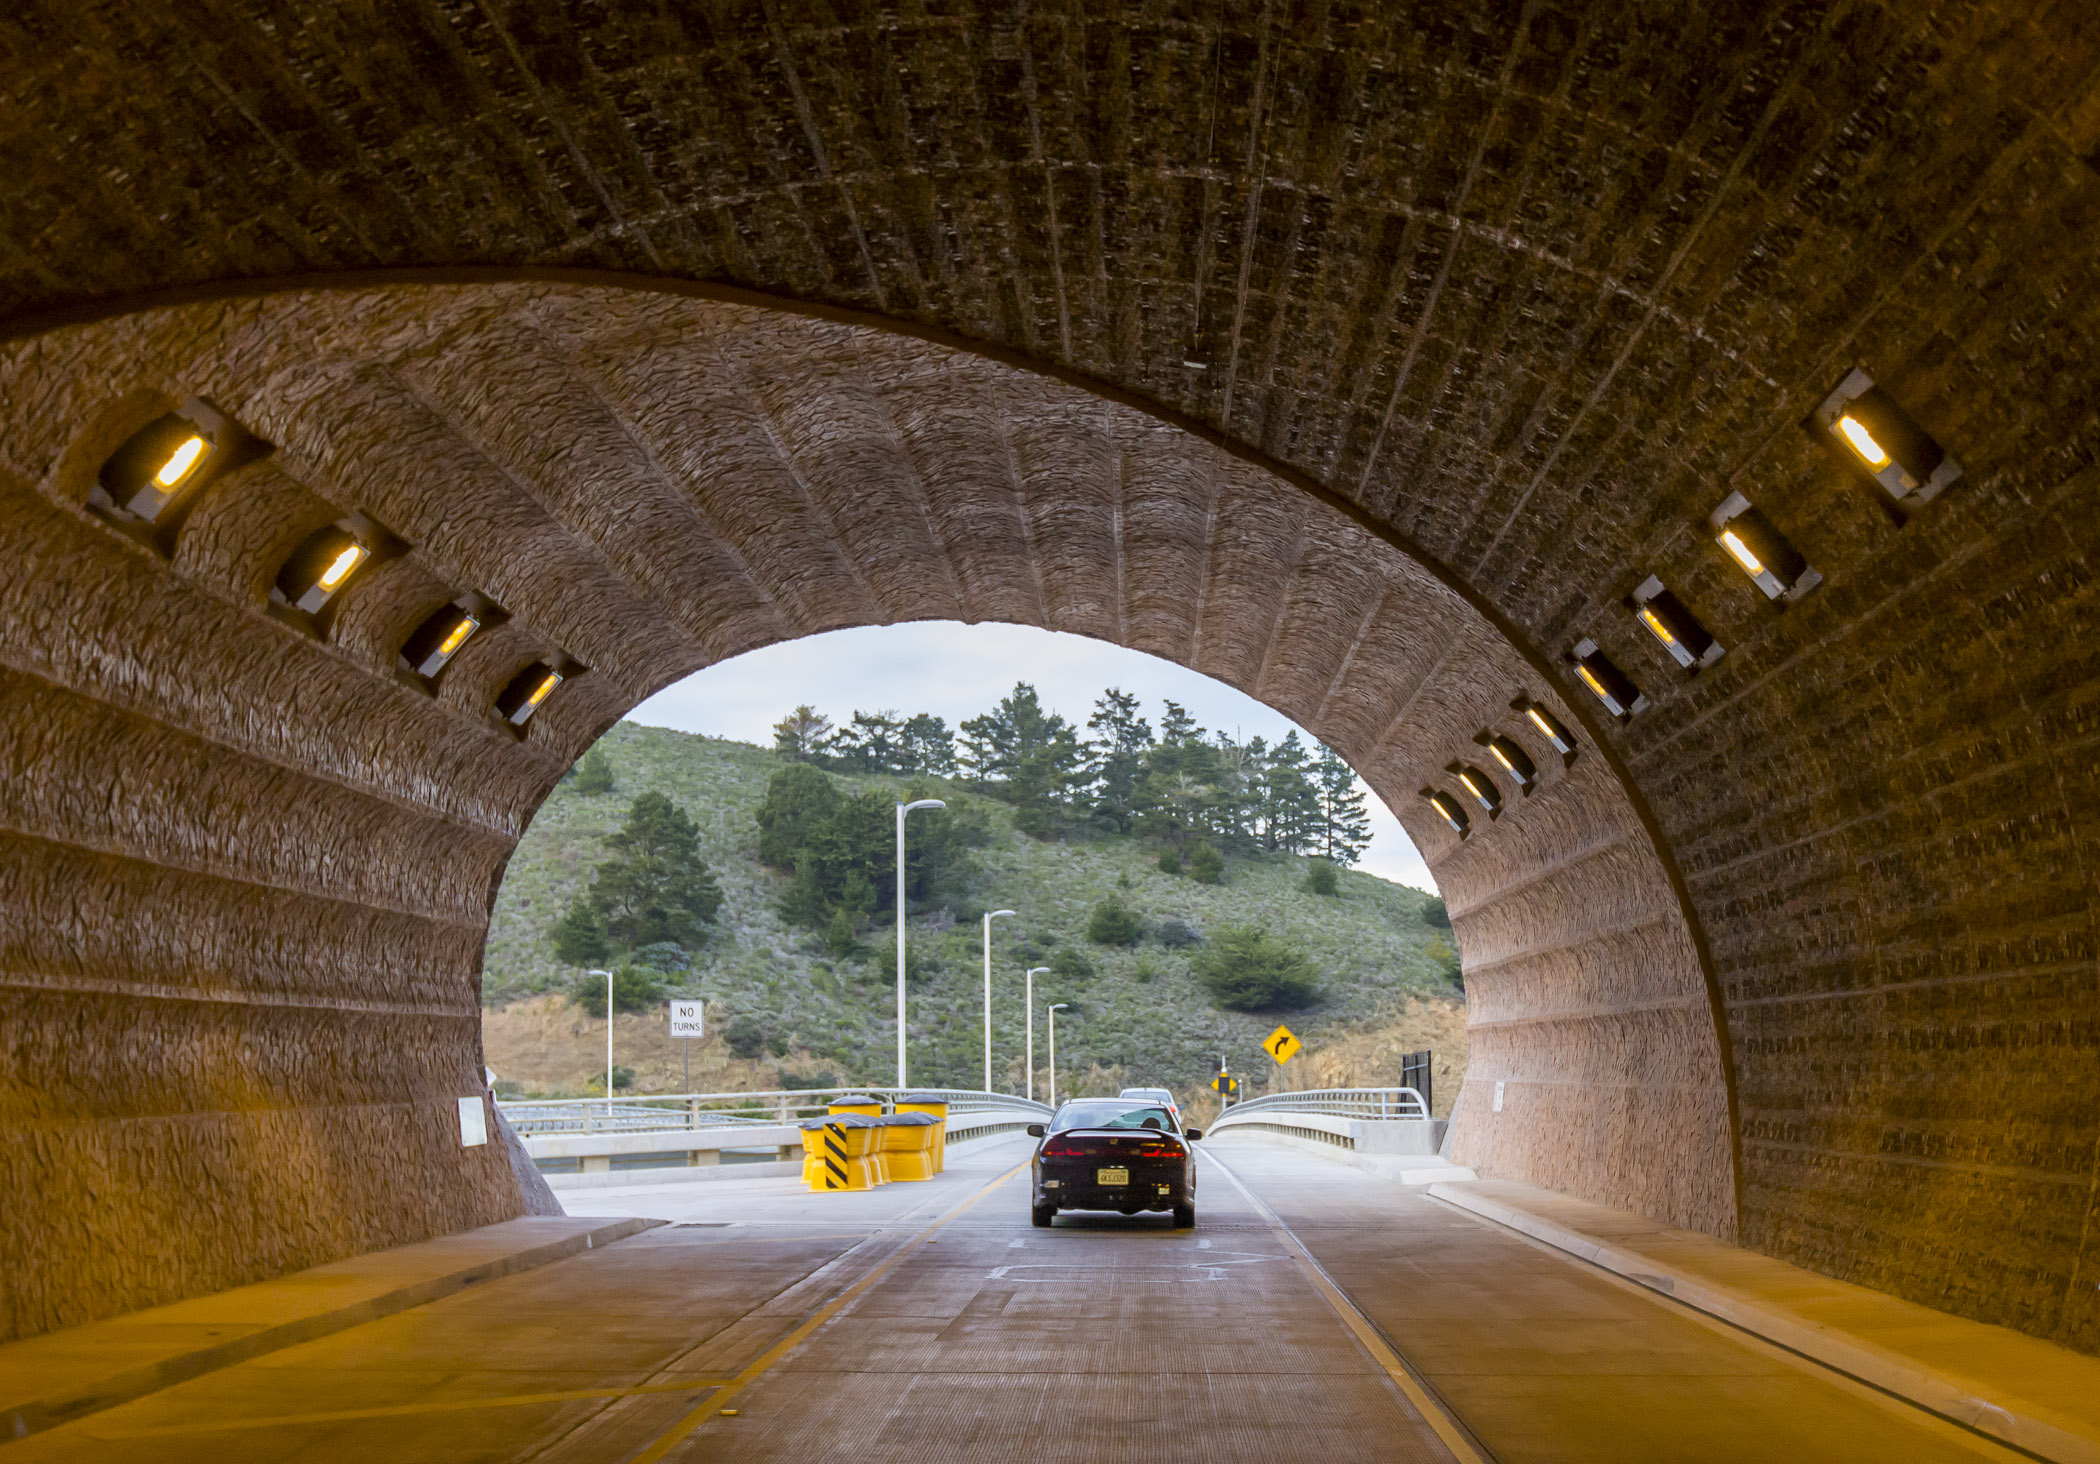 The Tom Lantos Tunnels at Devil’s Slide – which opened in 2013 and was designed by HNTB Corporation – have been honored with more than 15 industry awards.